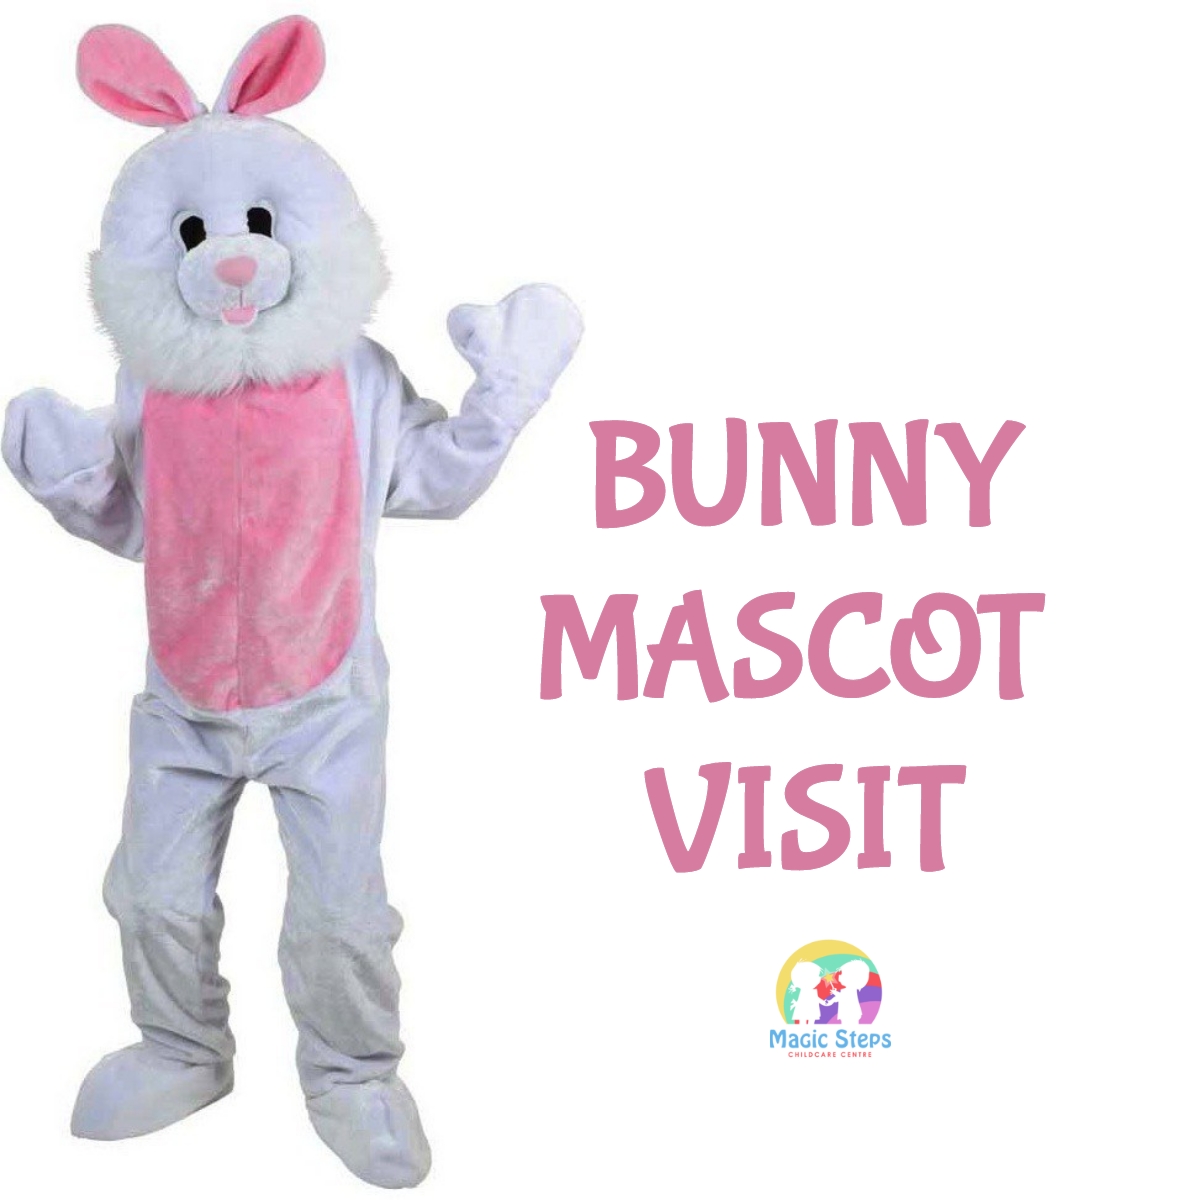 Bunny Mascot Visit- Wednesday 5th April